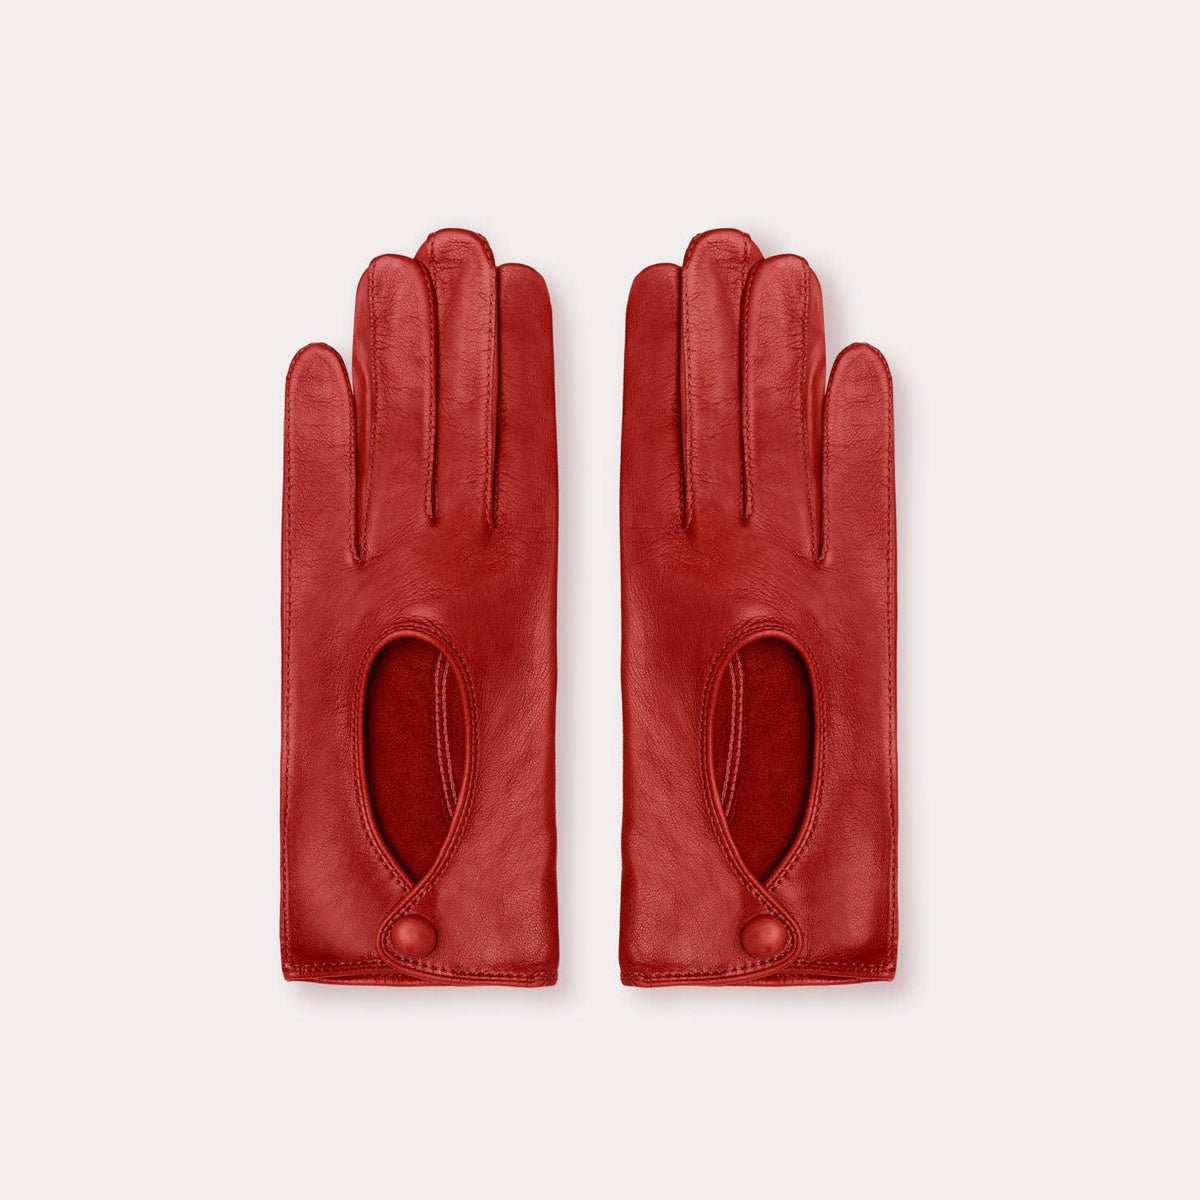 Original Driver Glove, red leather gloves. 